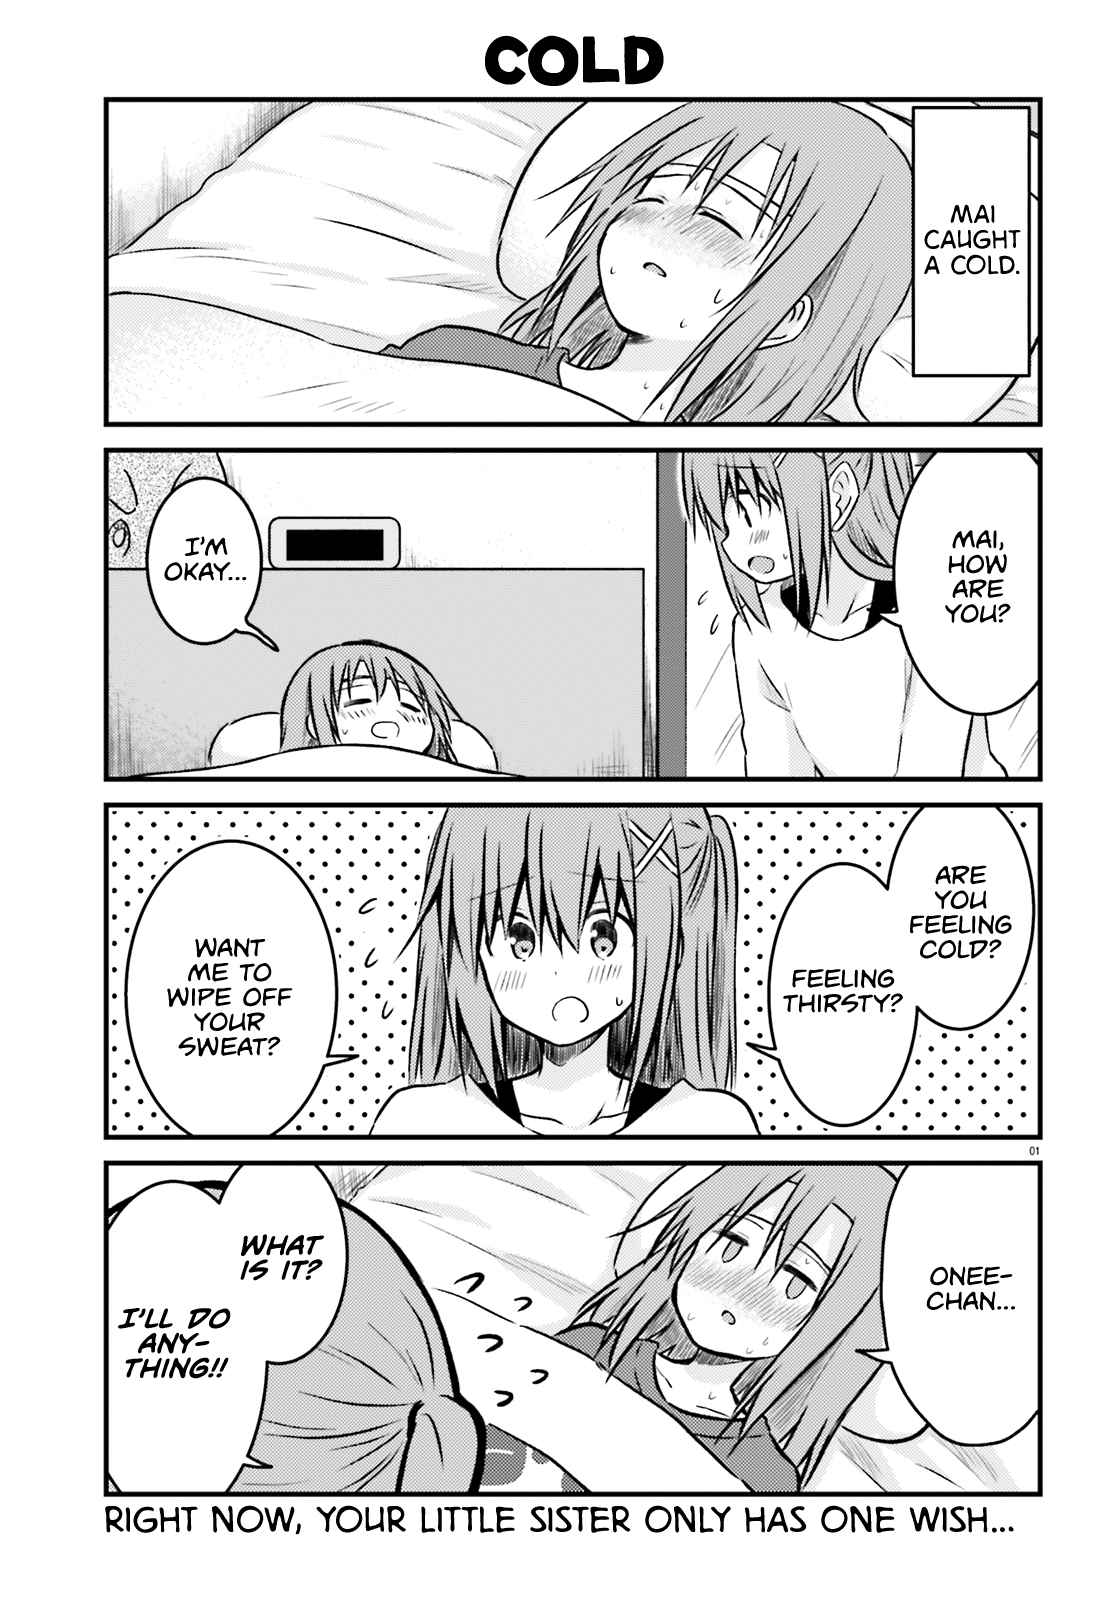 Her Elder Sister Has a Crush on Her, But She Doesn't Mind. Ch. 23 Siscon Elder Sister and Little Sister Who Caught a Cold